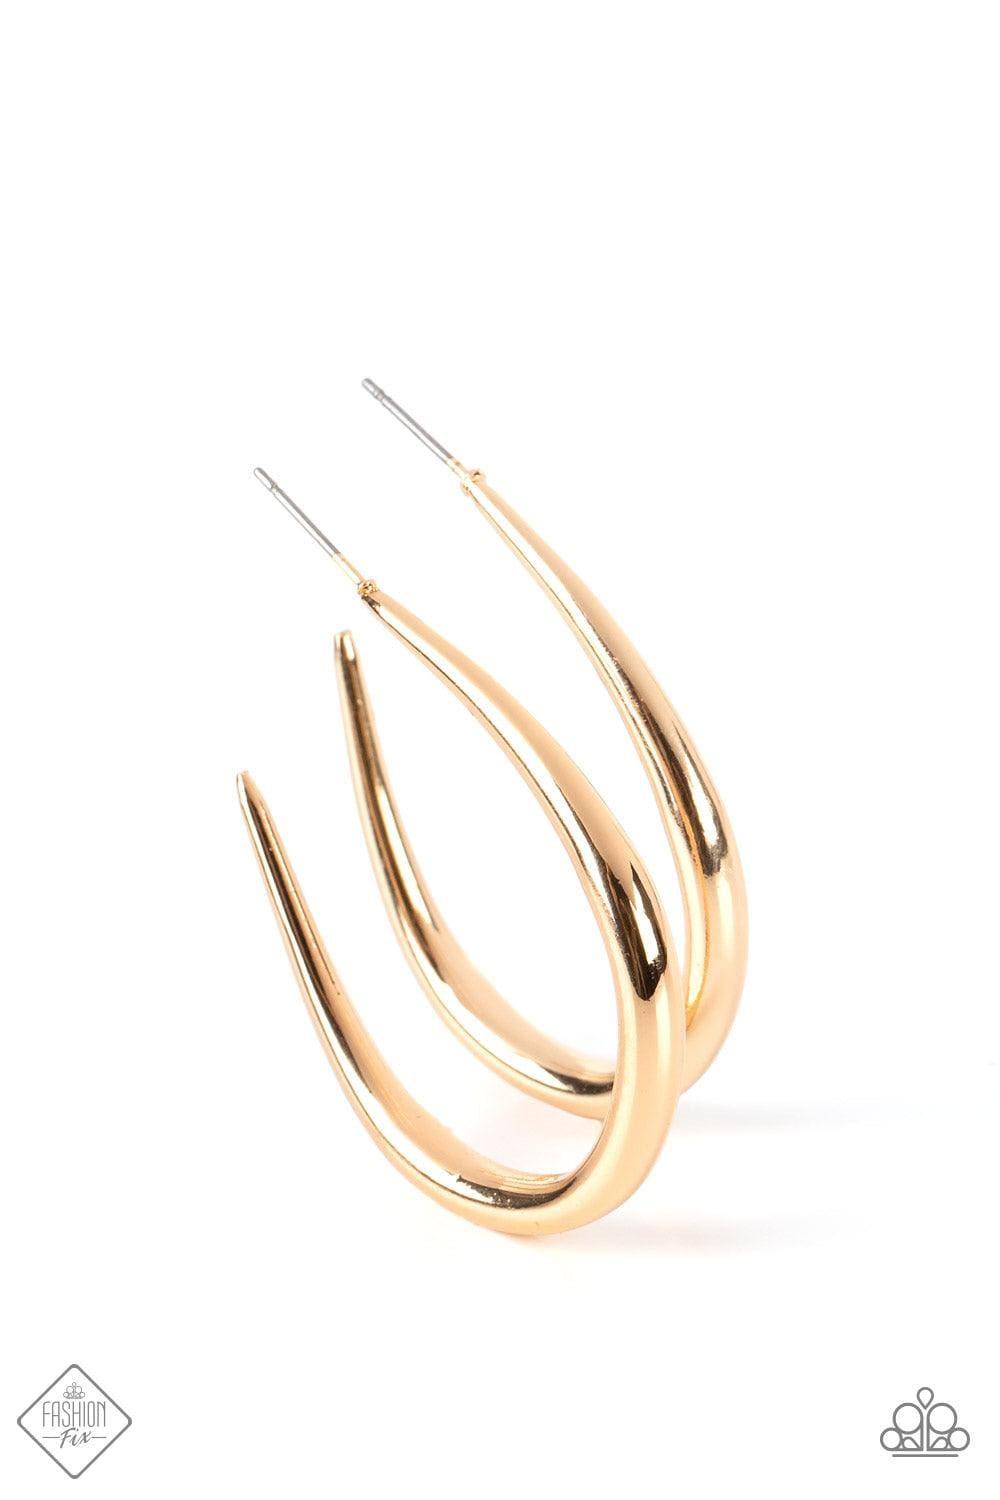 Paparazzi Accessories - Curve Your Appetite - Gold Hoop Earrings - Bling by JessieK